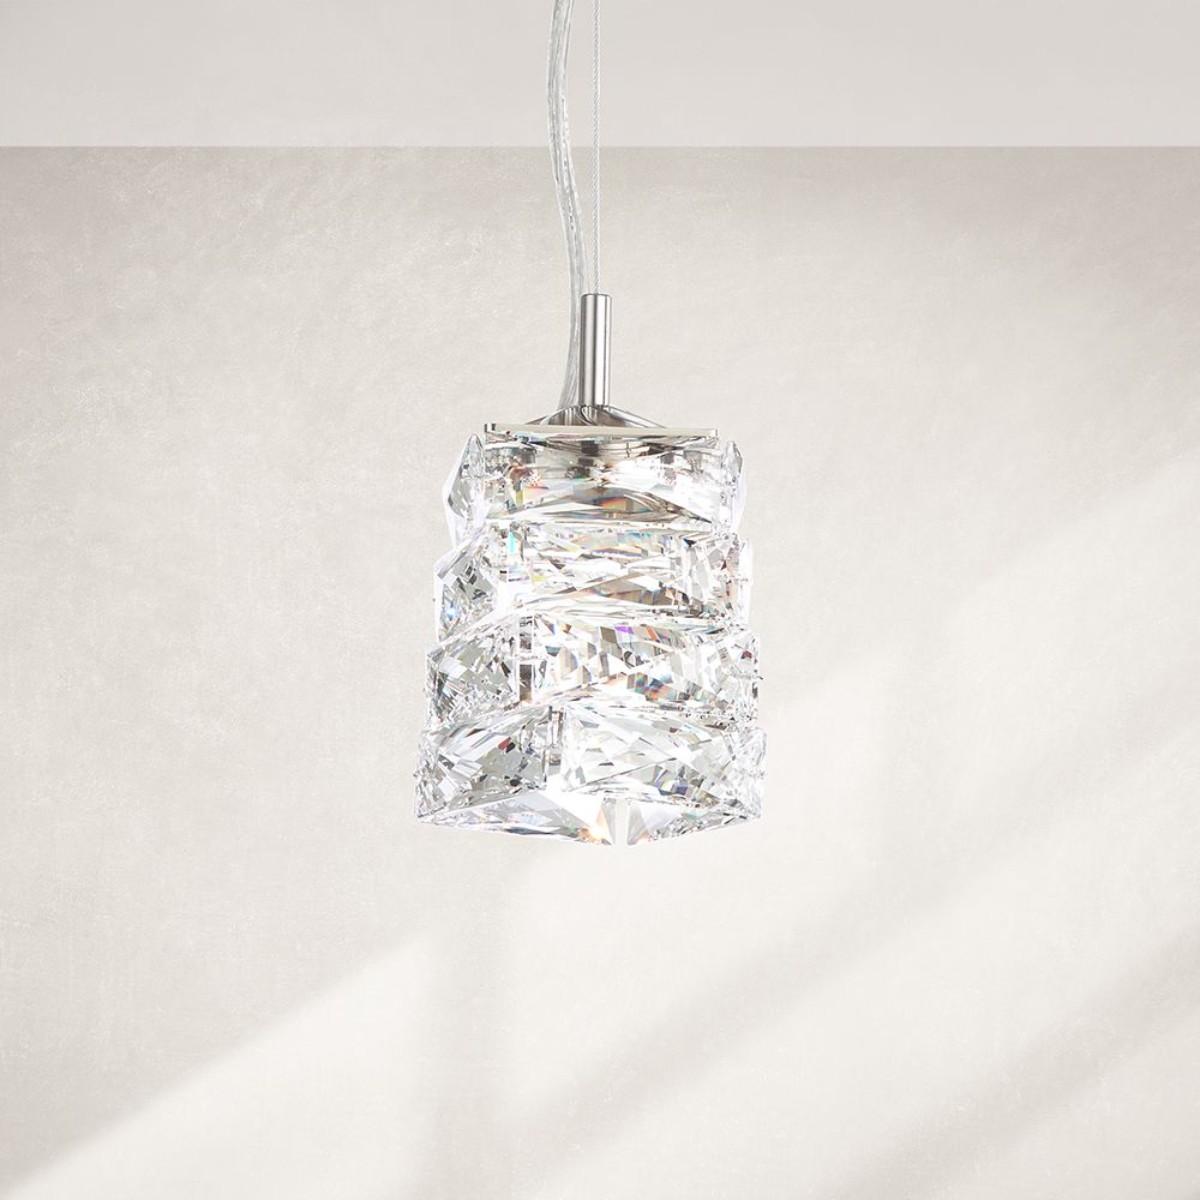 Glissando LED 5 inch Stainless Steel Modern Pendant Light with Crystals from Swarovski